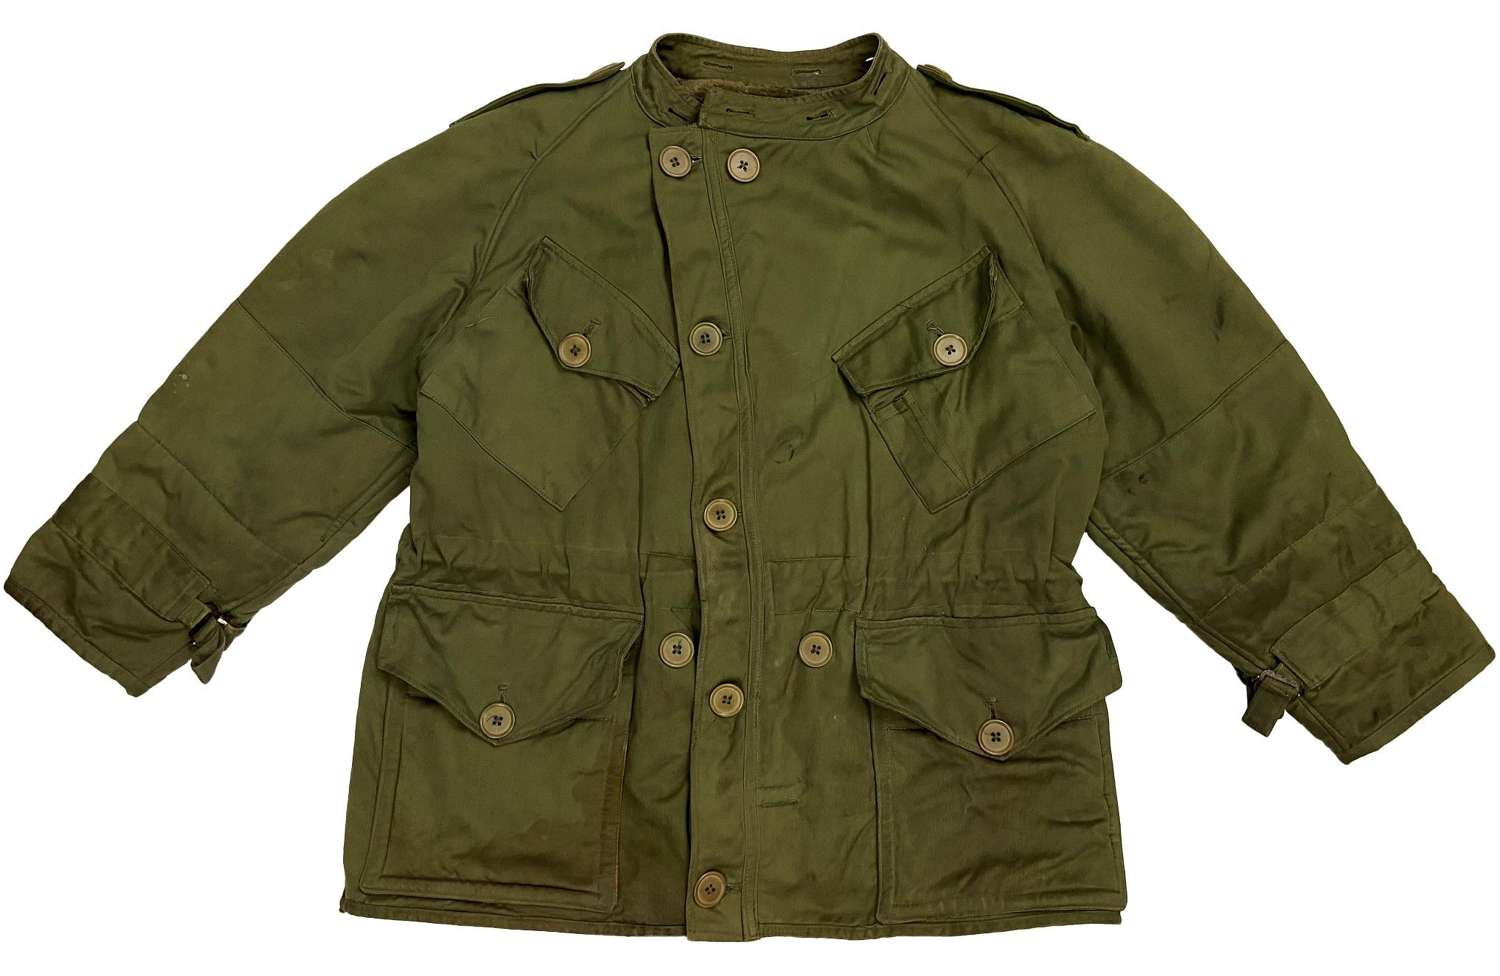 Original 1954 Dated British Army Middle Parka - Size 2